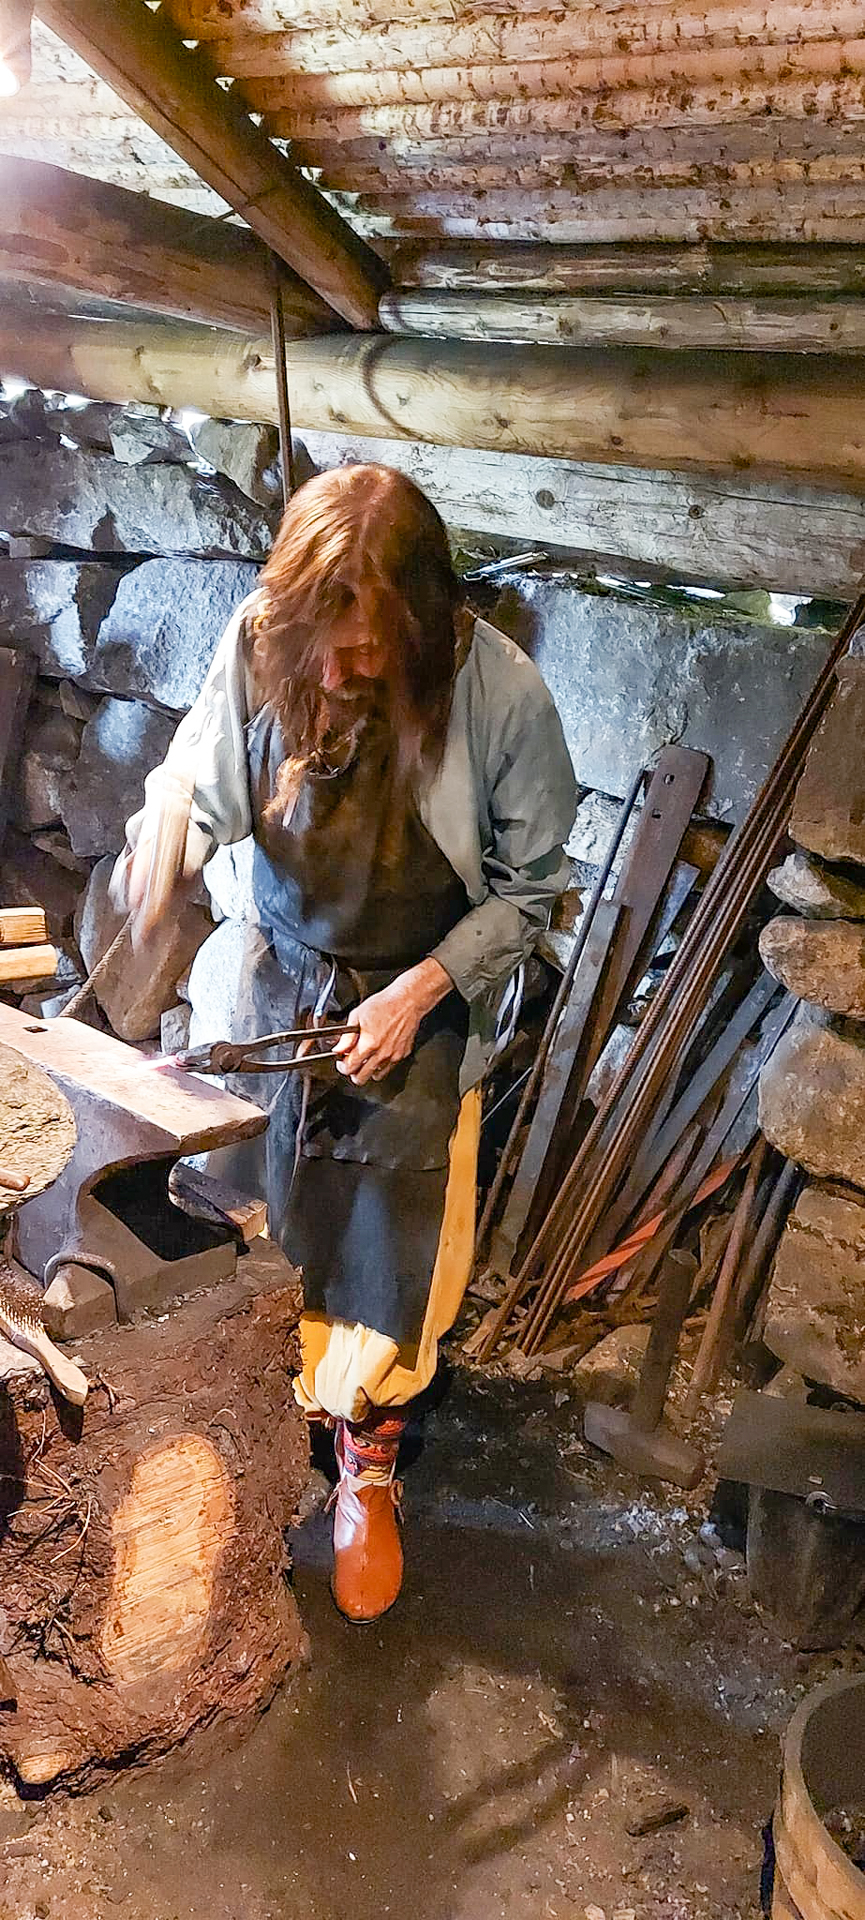 In with the old: Ancient skills alive and kicking in Norrland